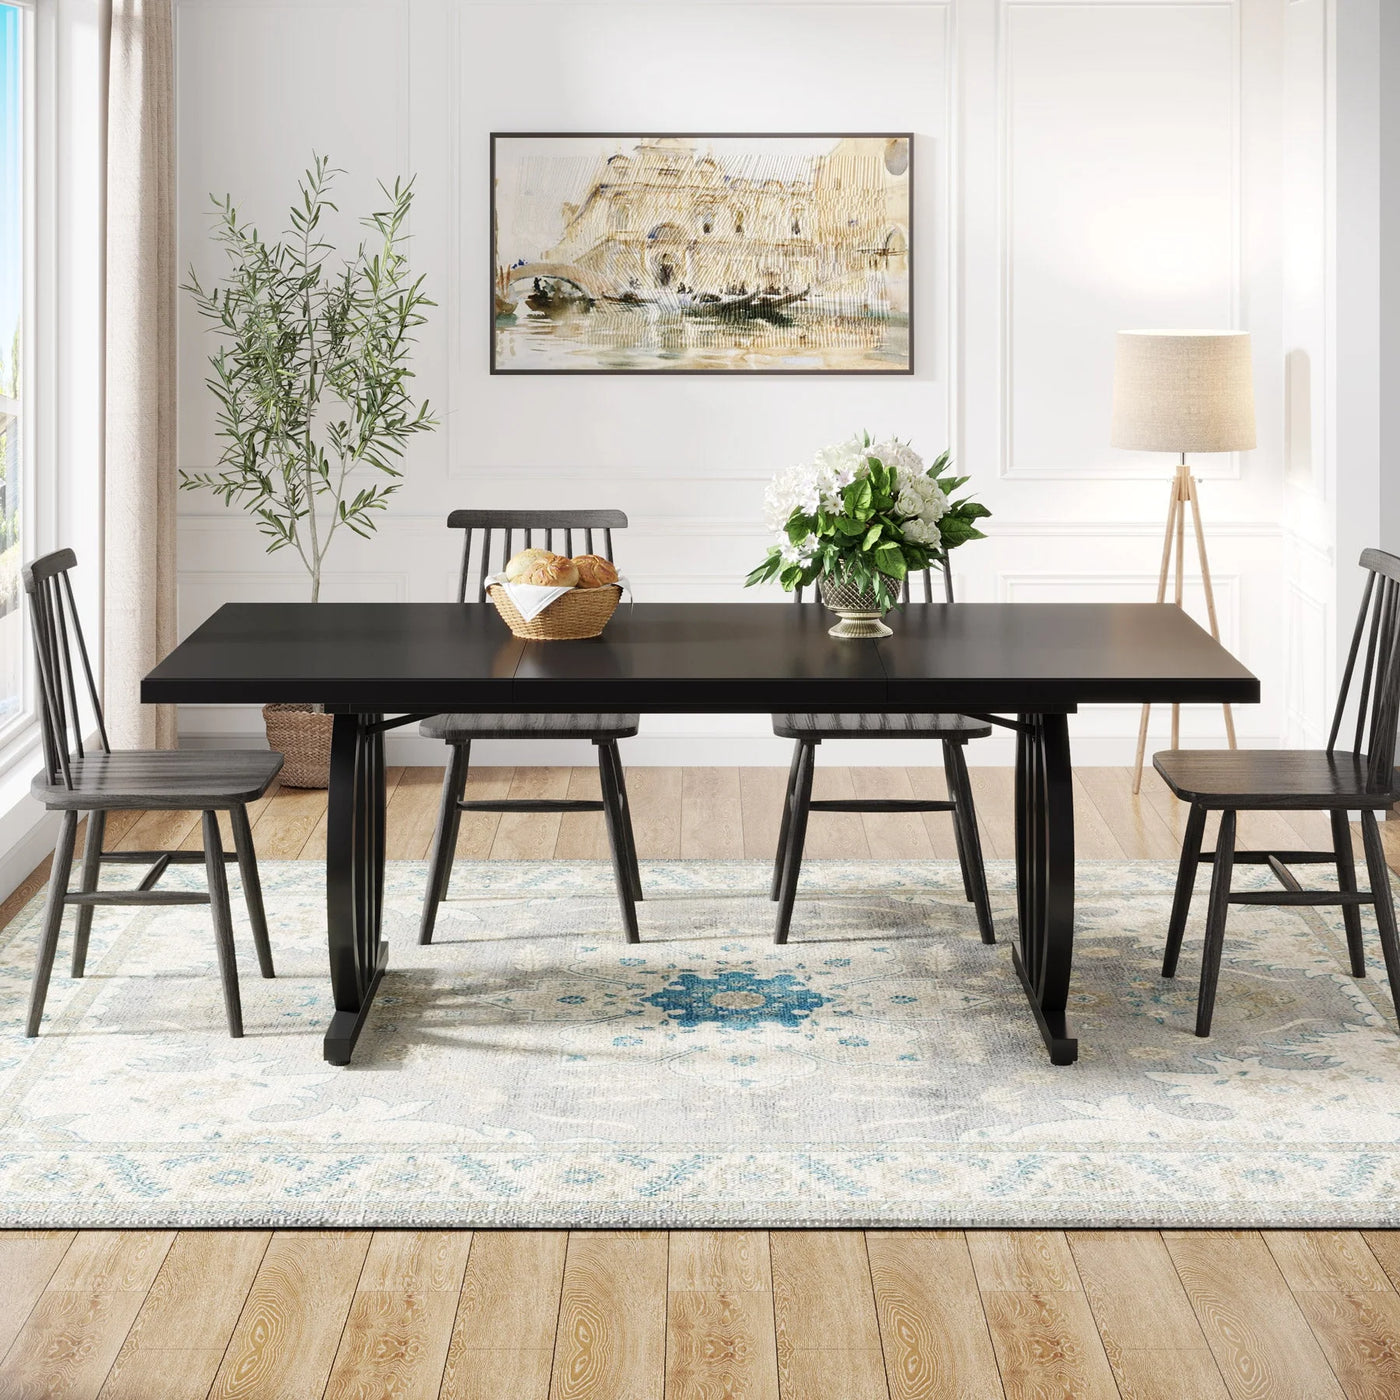 Guillame 63" Dining Table for 4-6 People | Modern Wood Kitchen Dinner Table with Metal Frame